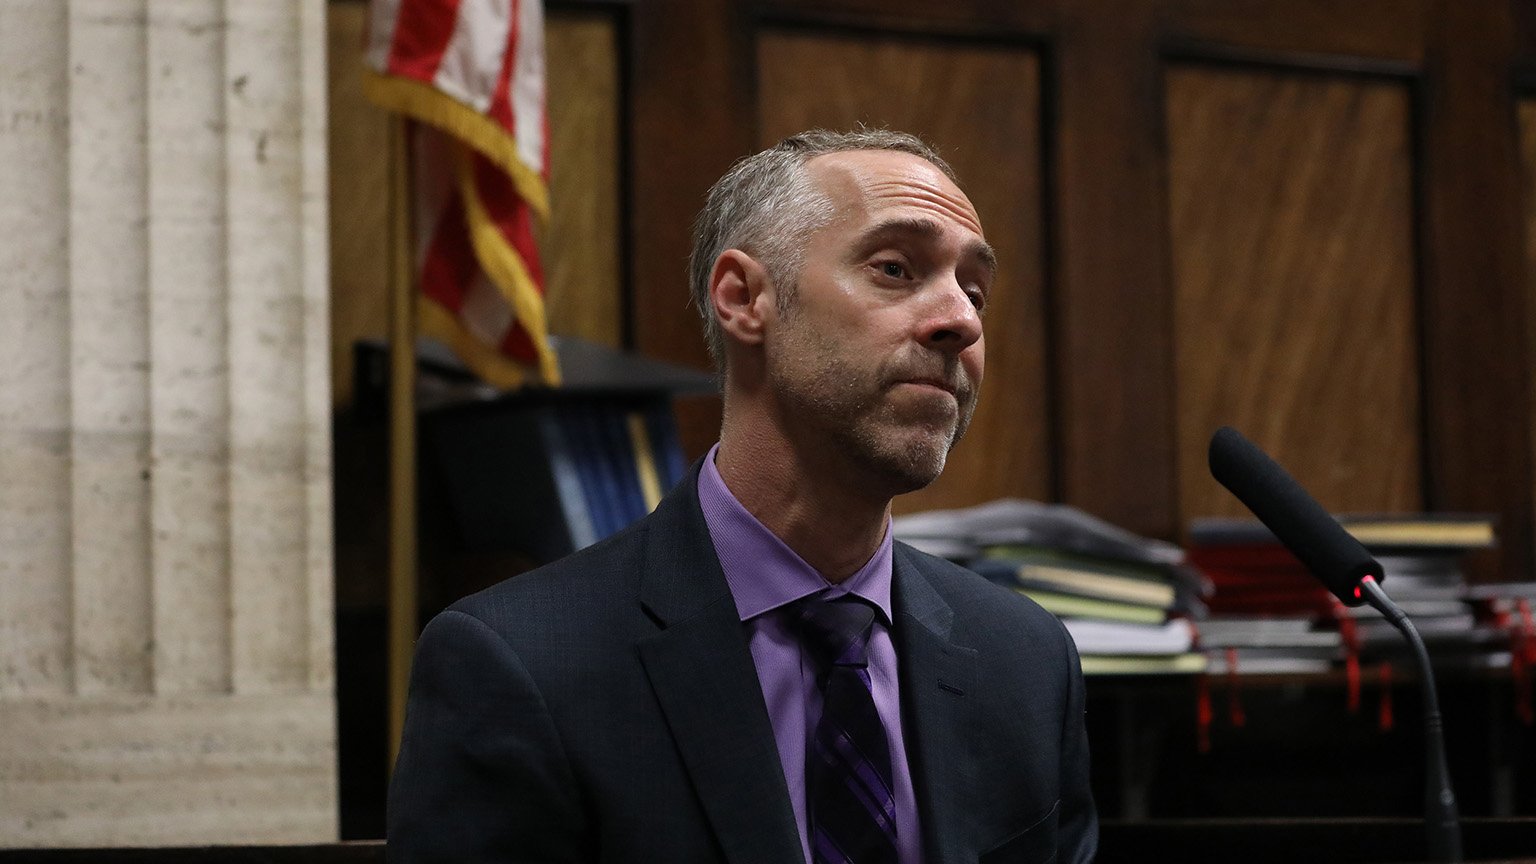 Witness Bryan Edelman, a trial consultant hired by the defense to conduct change-of-venue polls, answers questions at a hearing in the Jason Van Dyke case at Leighton Criminal Court in Chicago on April 18, 2018. (Nancy Stone / Chicago Tribune / Pool)